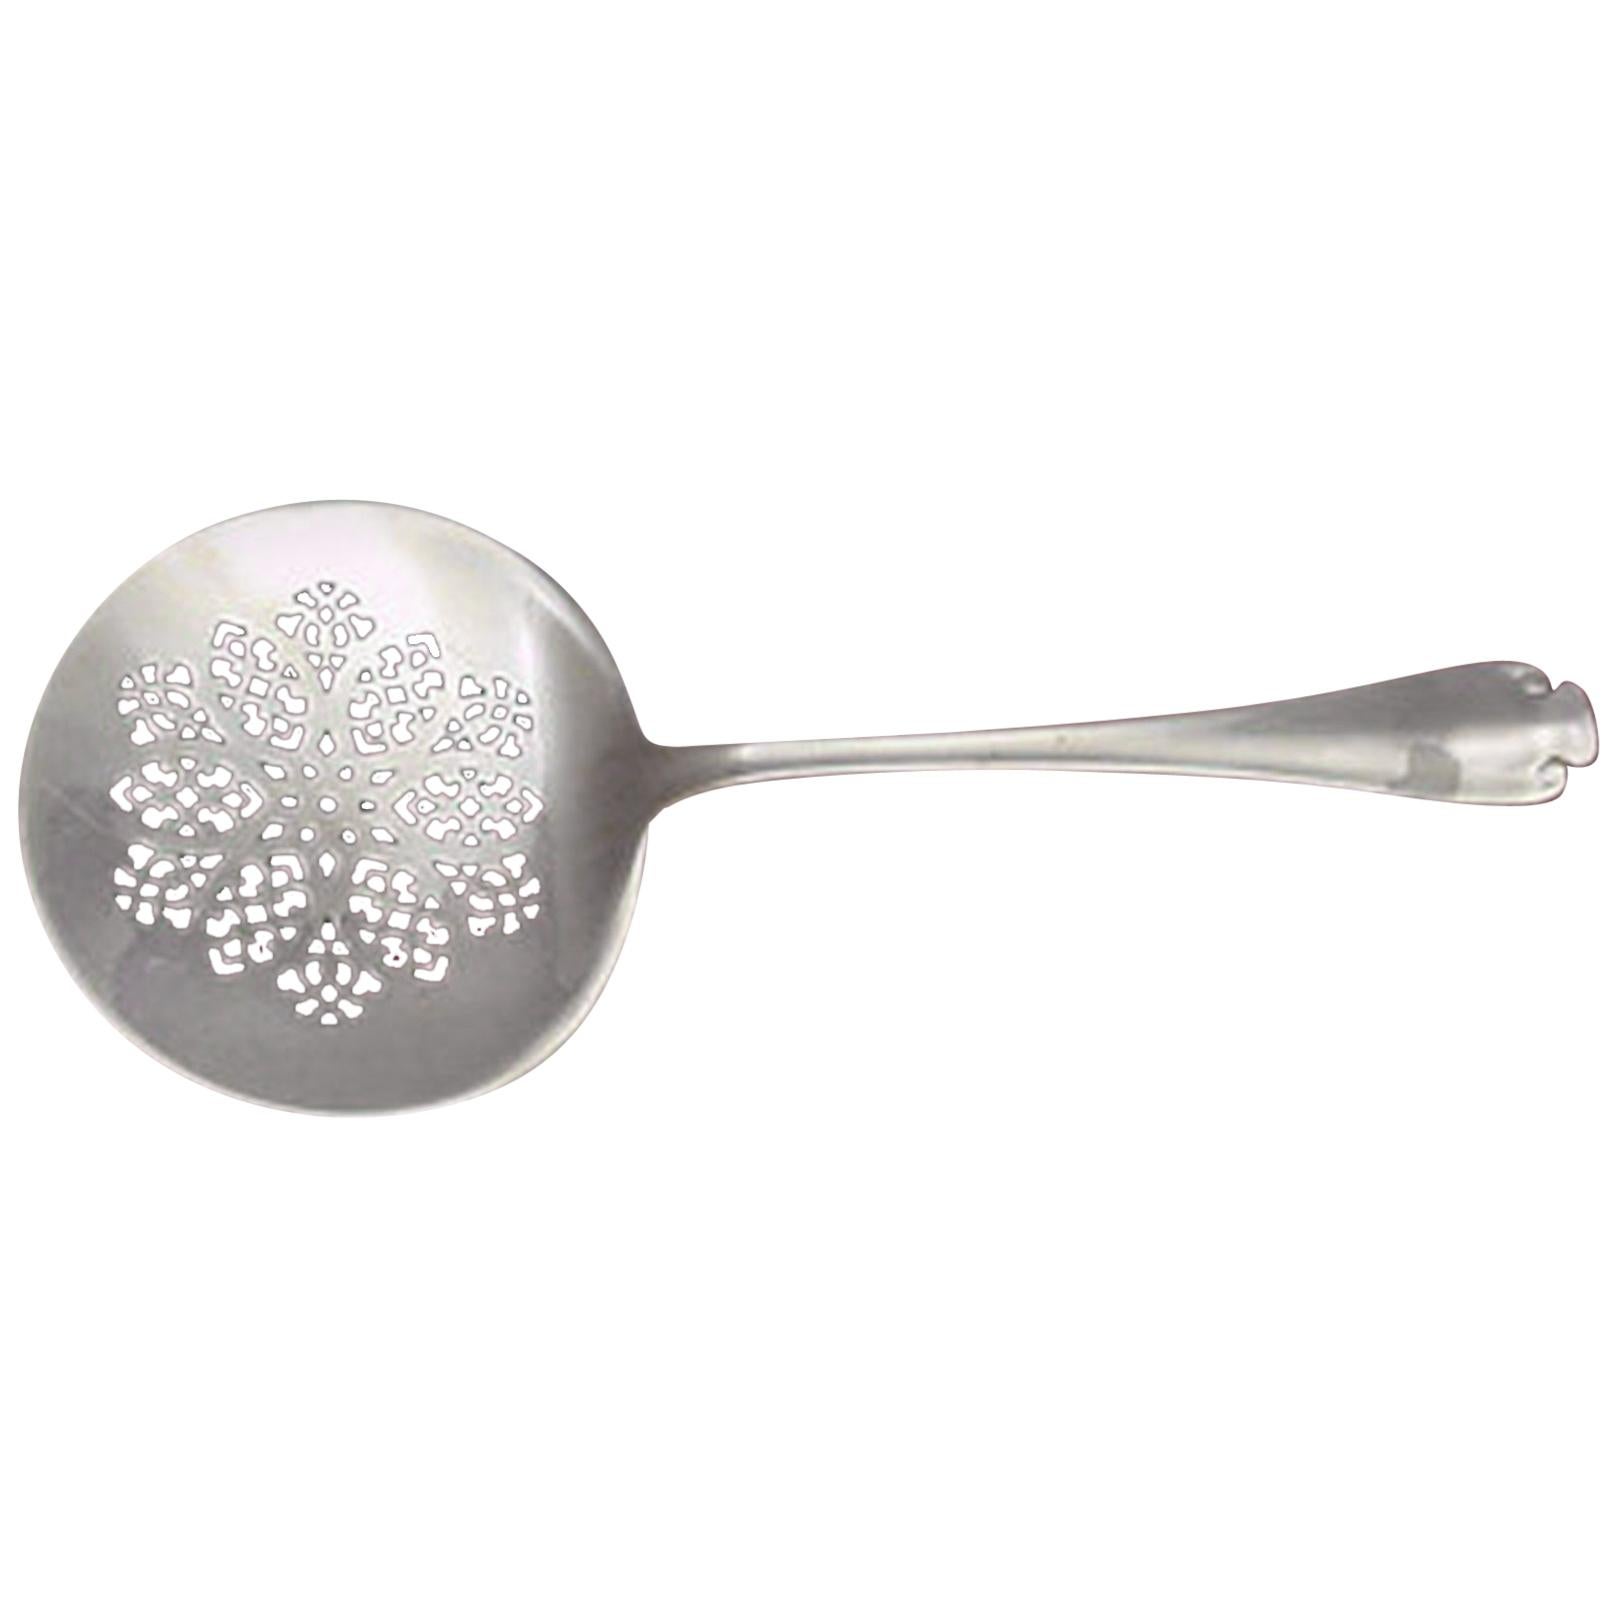 Flemish by Tiffany and Co. Sterling Silver Tomato Server